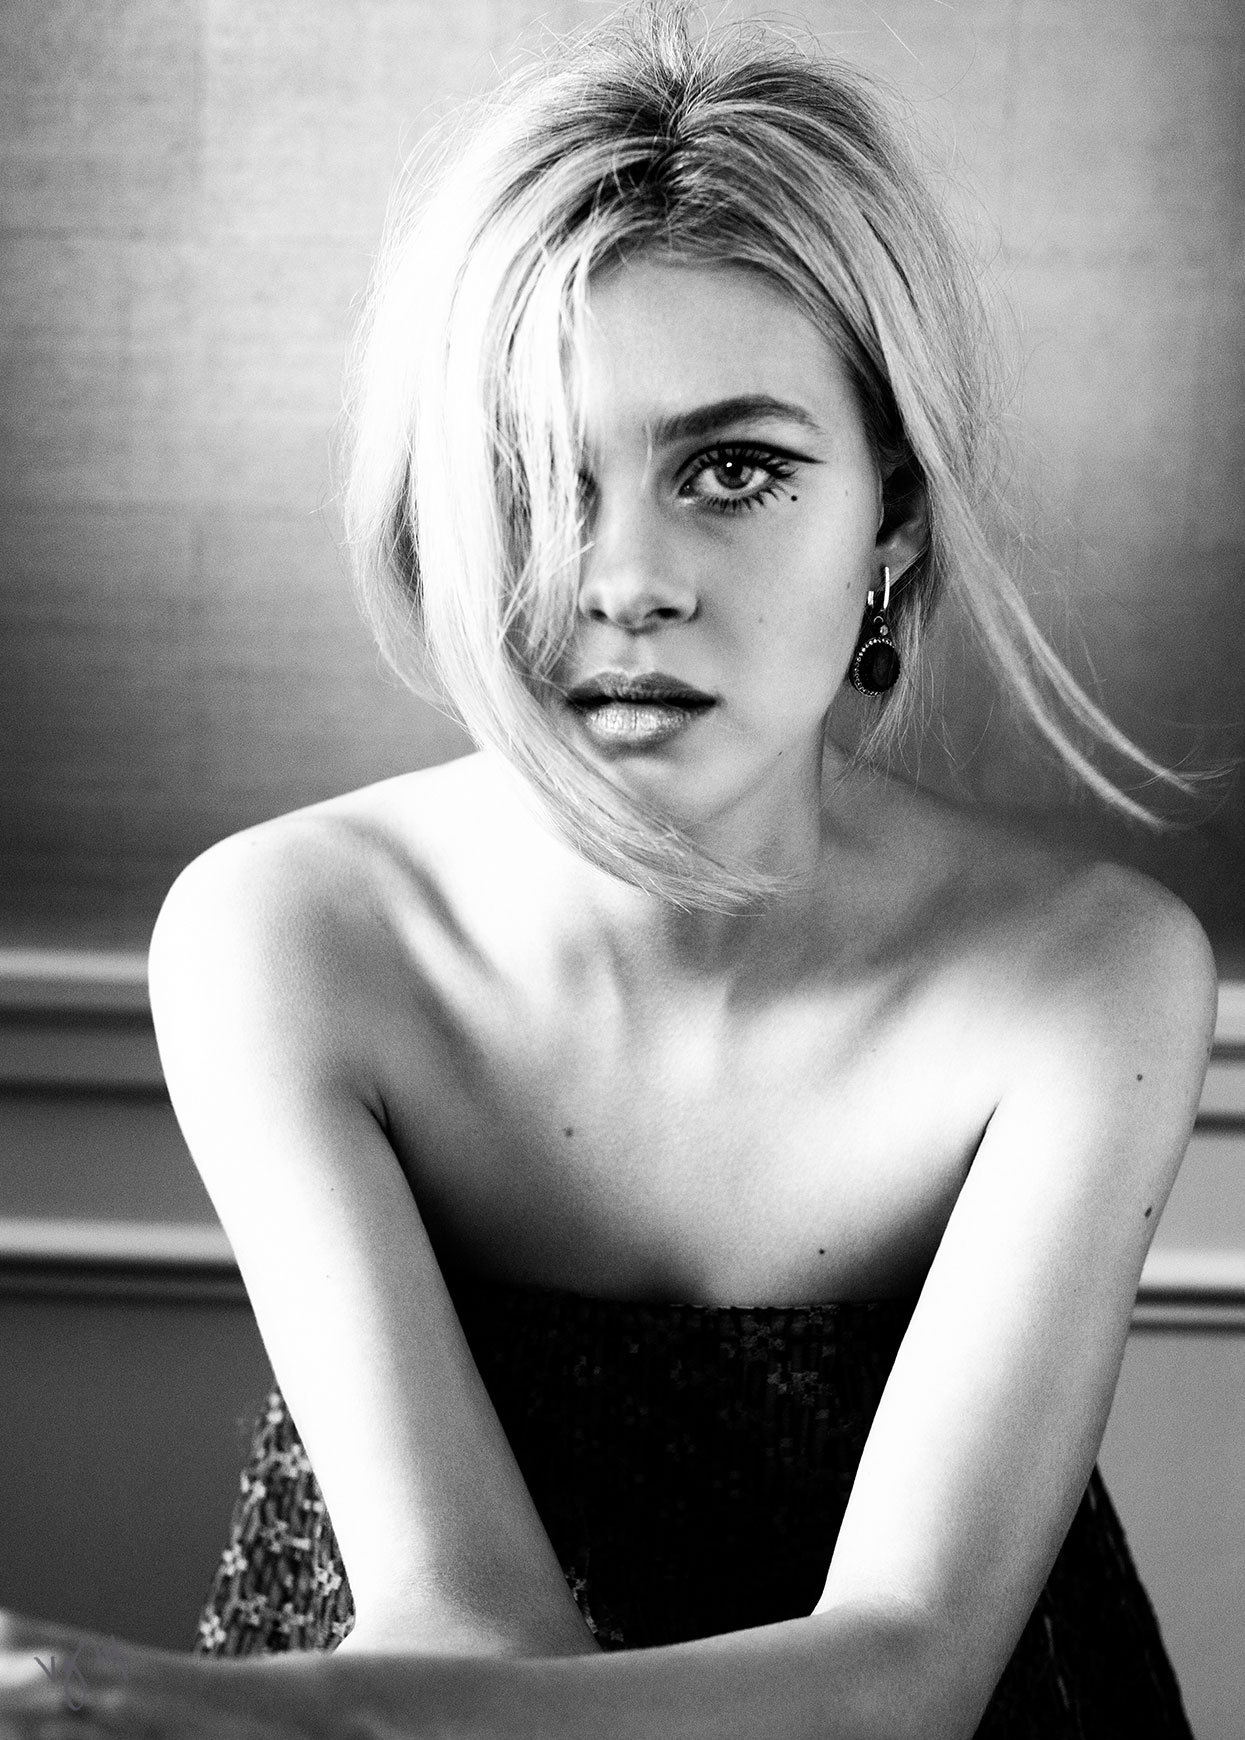 VIOLET IN BLOOM featuring Nicola Peltz  |  The new Transformers star has a tête–à–tête with Rosie Huntington-Whiteley  |  #VioletGrey, The Industry’s Beauty Edit